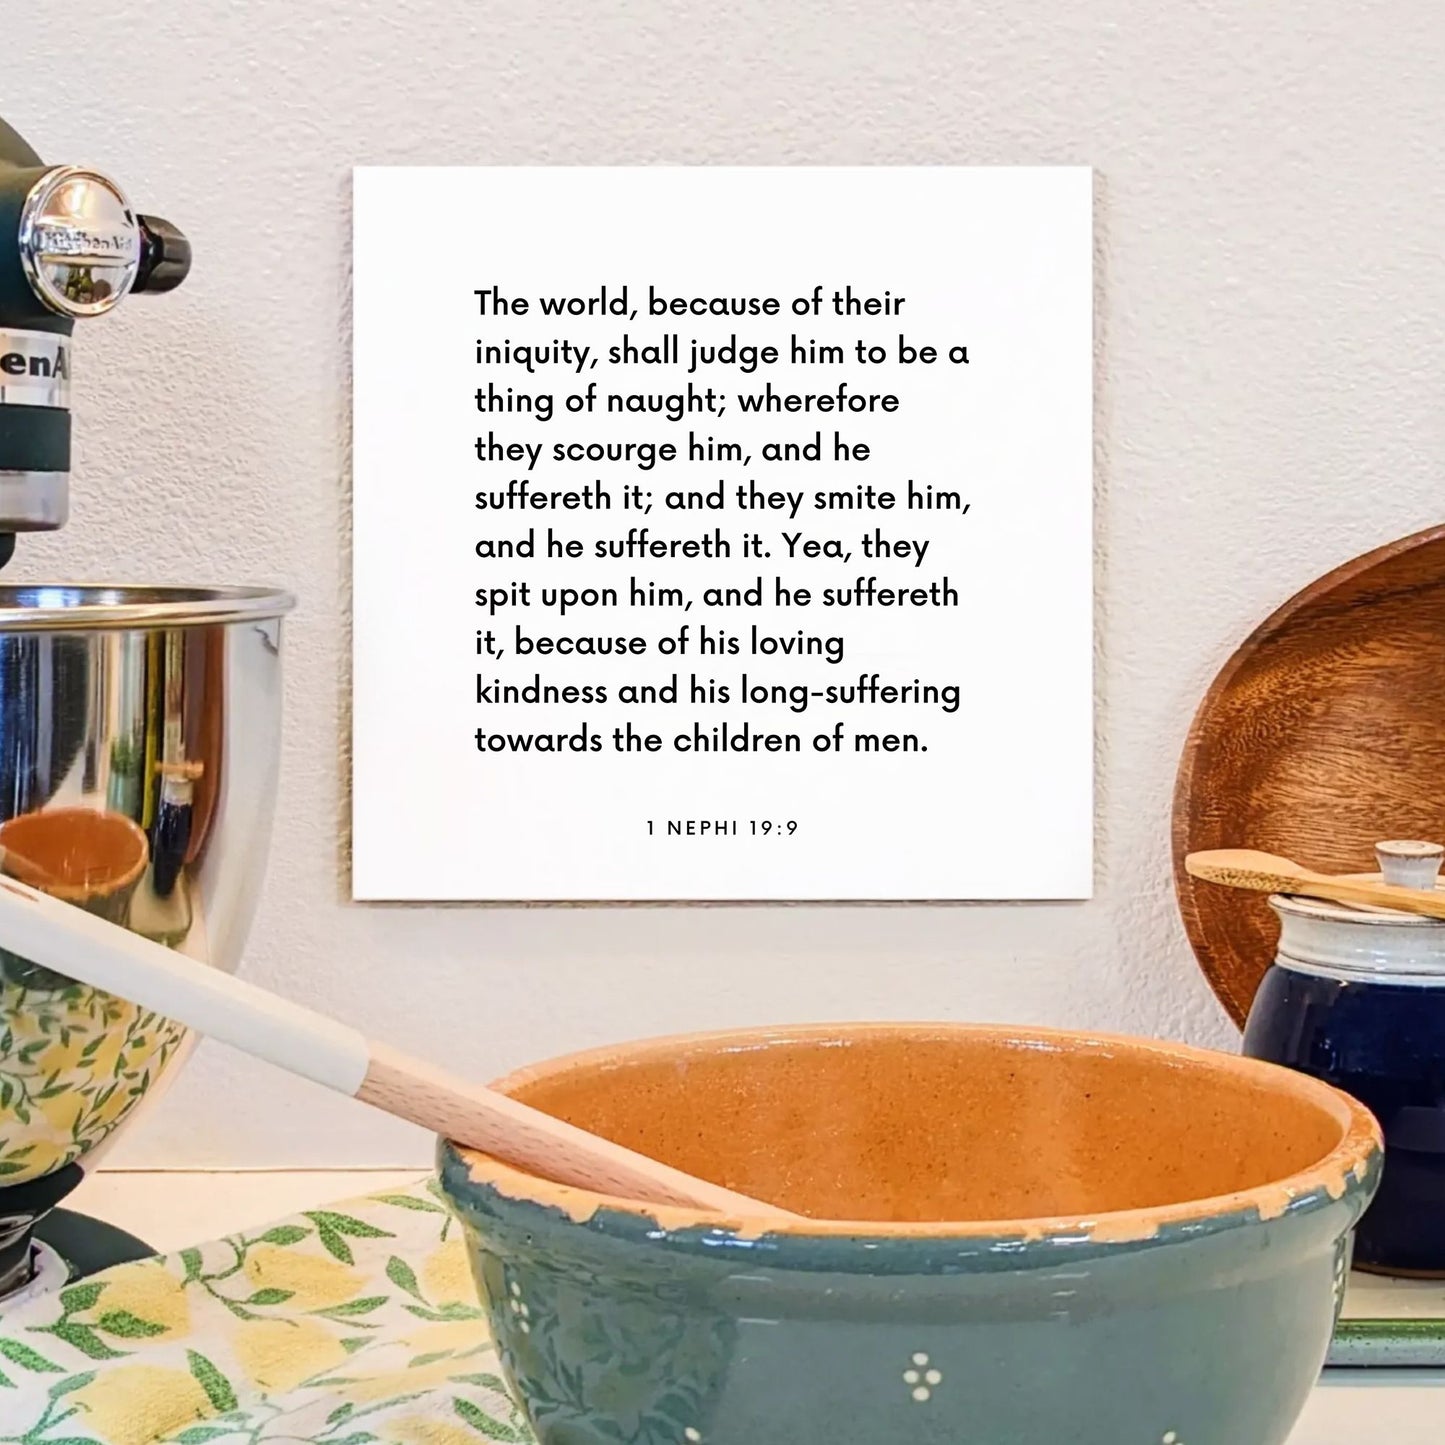 Kitchen mouting of the scripture tile for 1 Nephi 19:9 - "Because of his loving kindness and his long-suffering"